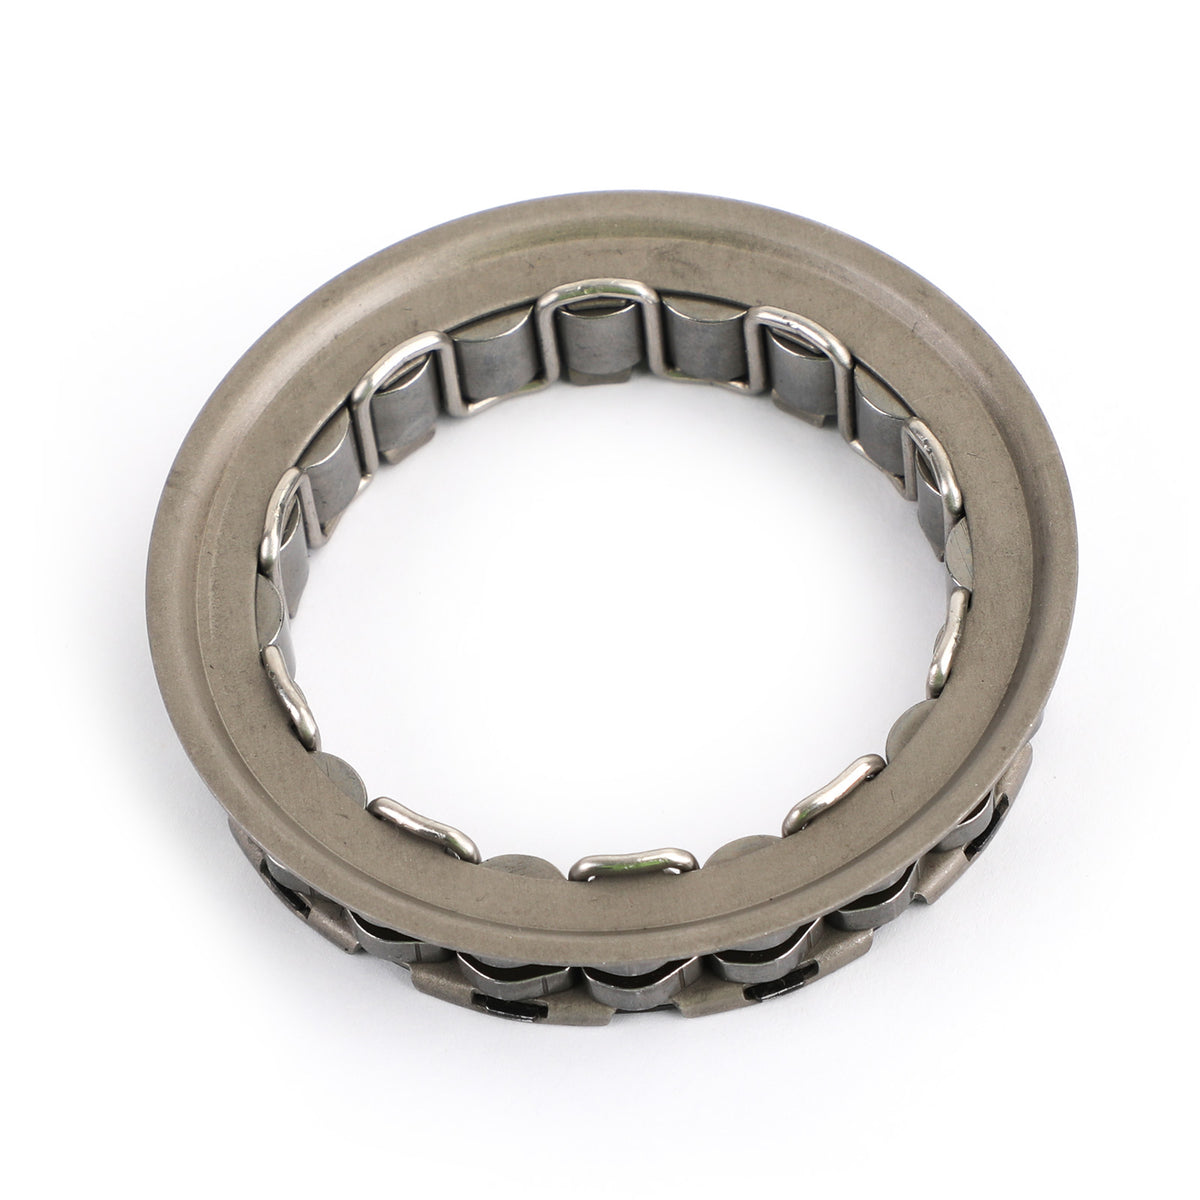 Flywheel Starter Clutch Bearing Fit for CAN-AM Traxter 00-05 420659117 711659115